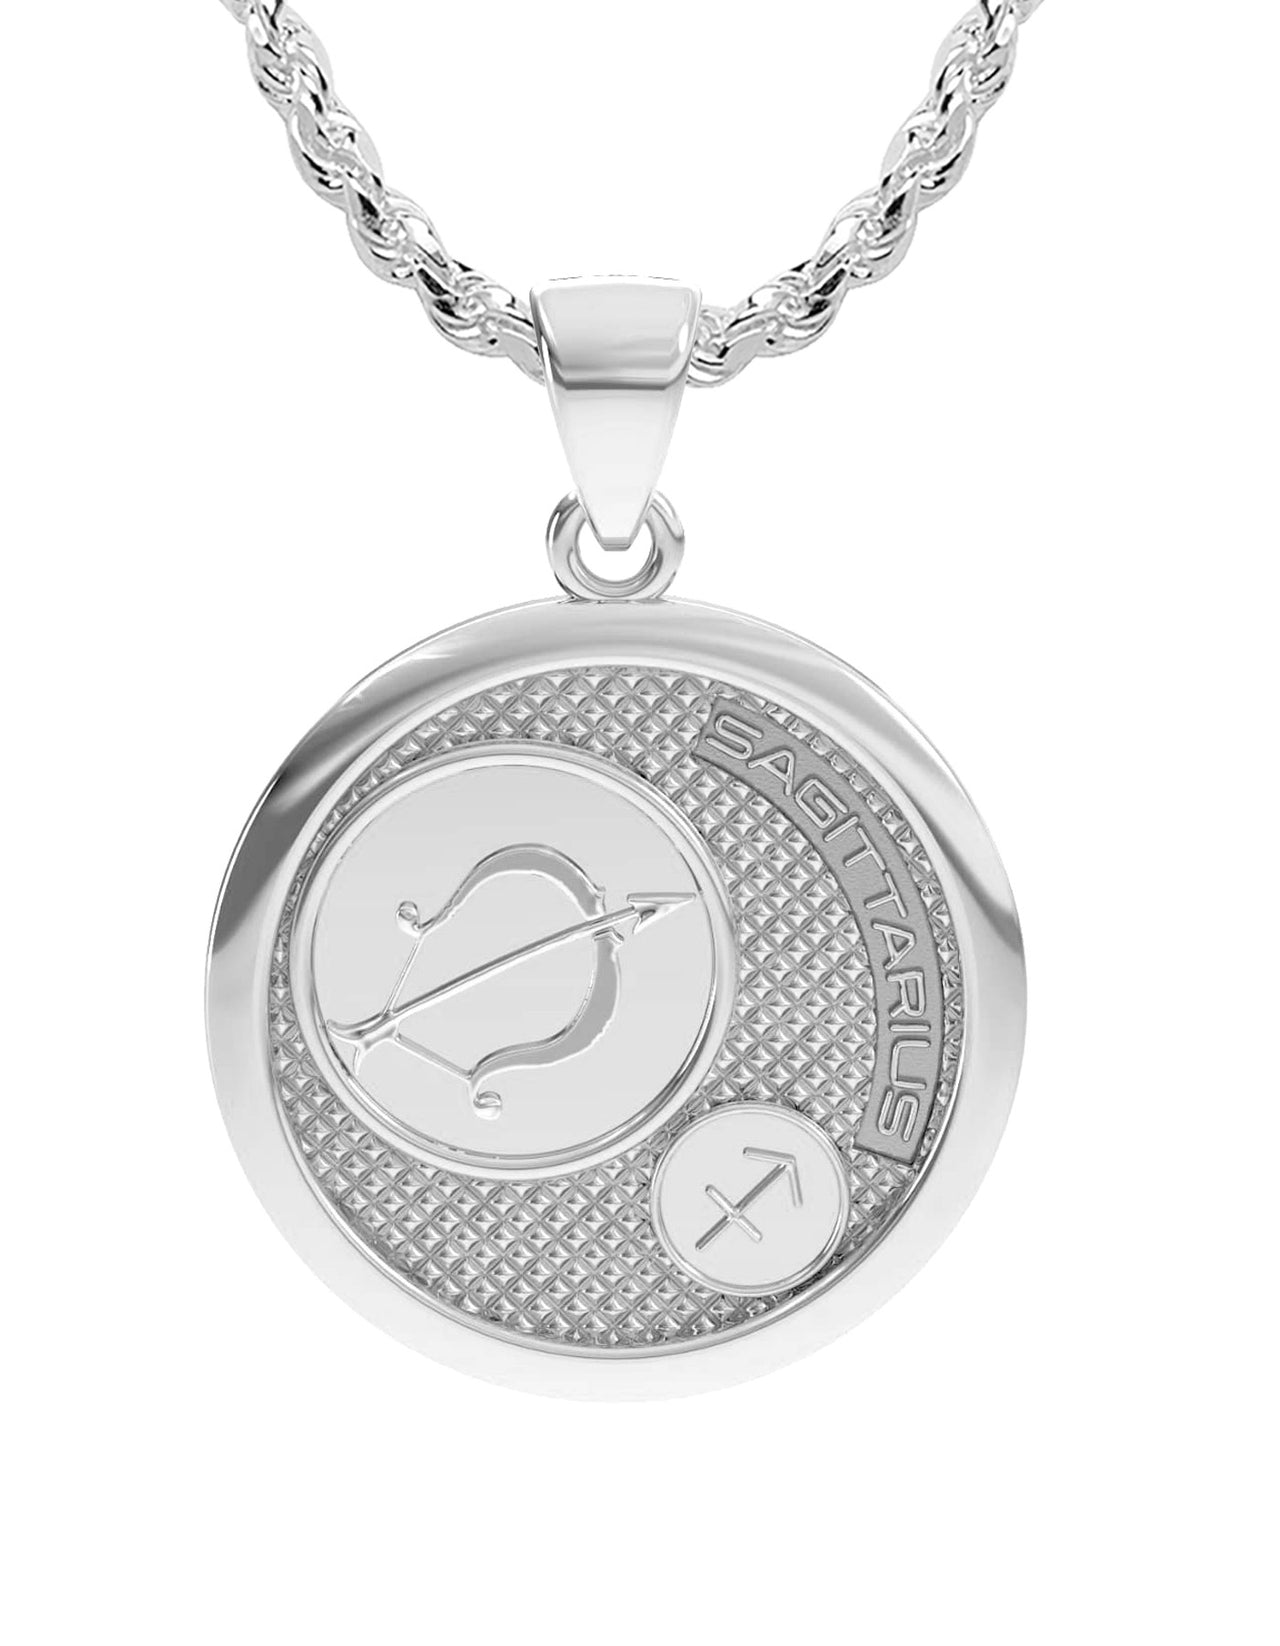 Ladies 925 Sterling Silver Round Sagittarius Zodiac Polished Finish Pendant Necklace, 25mm